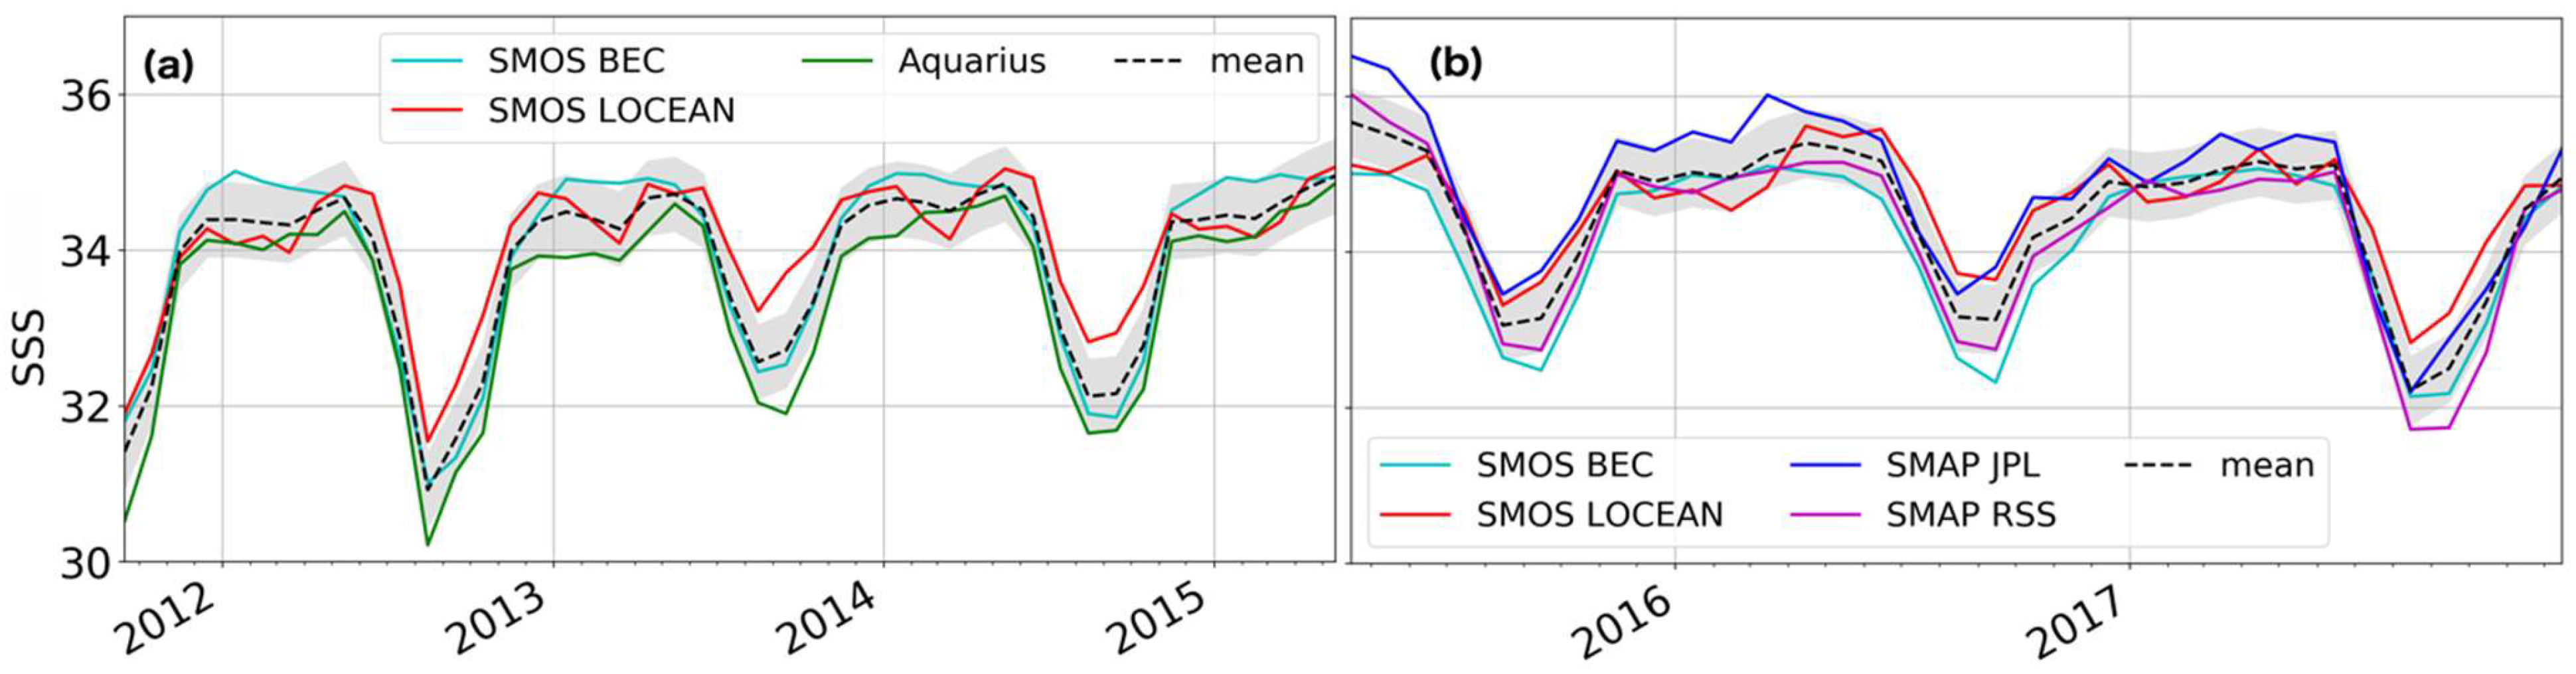 Remote Sensing | Free Full-Text | Evaluation and Intercomparison of SMOS,  Aquarius, and SMAP Sea Surface Salinity Products in the Arctic Ocean